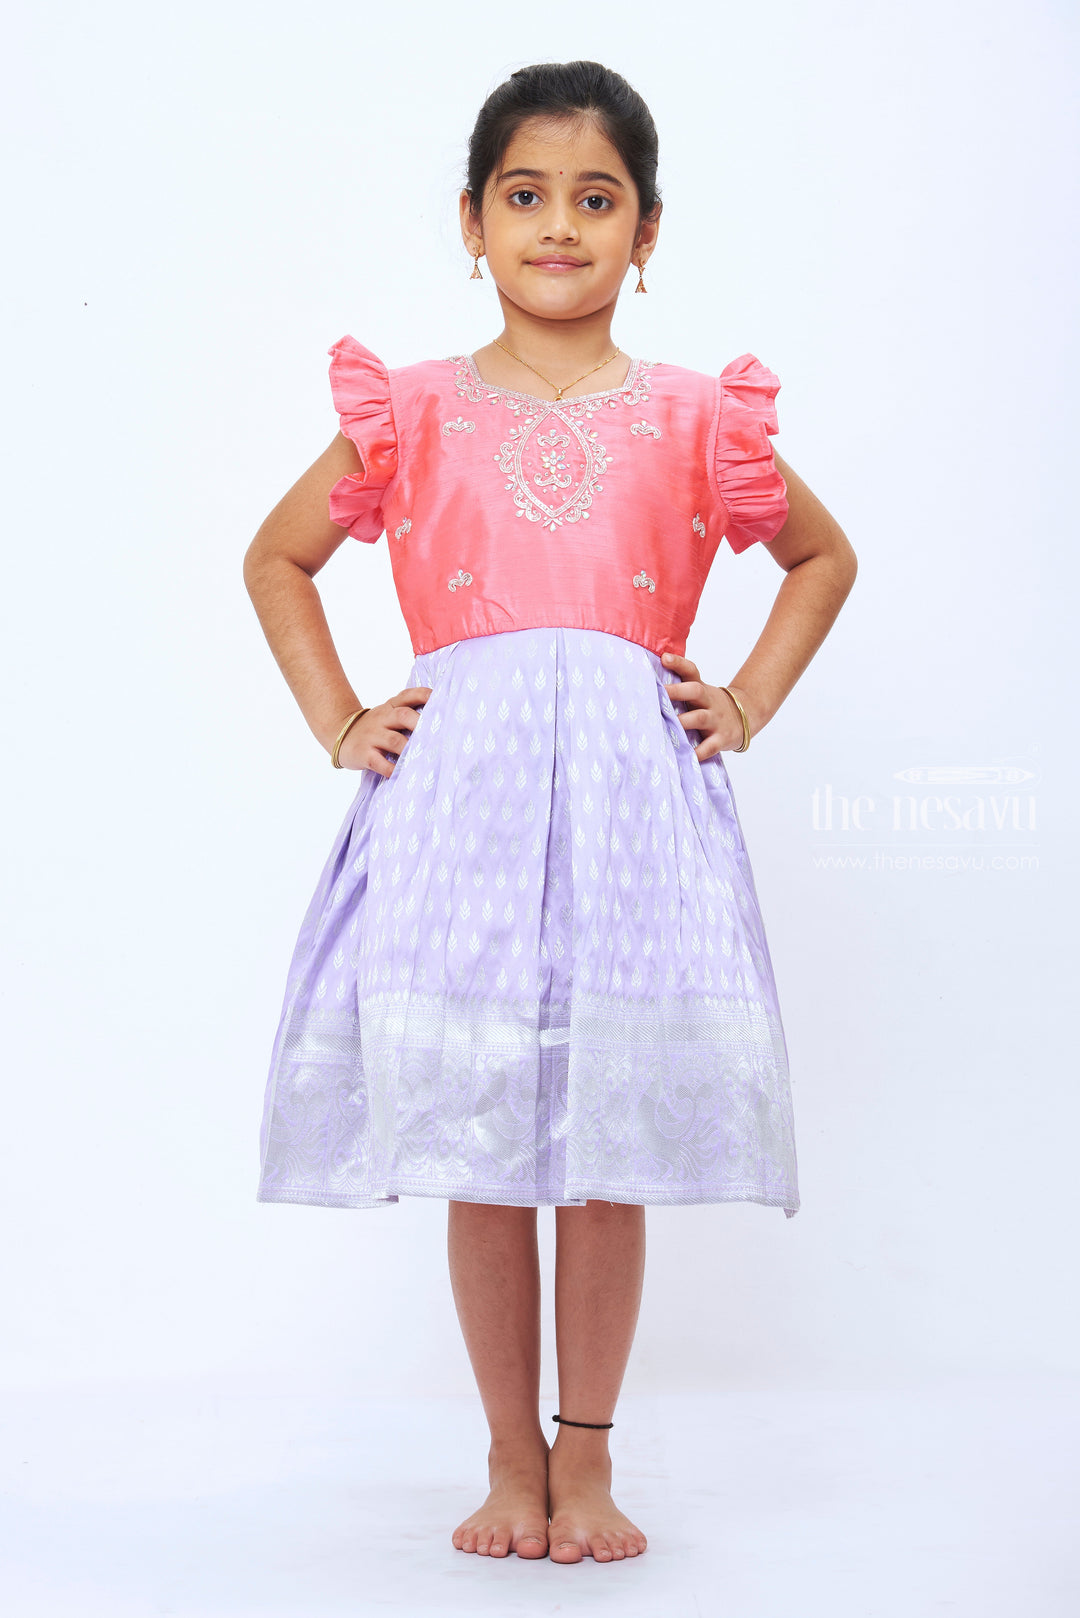 The Nesavu Silk Party Frock Enchanted Silk Elegance - Girls' Pink and Lavender Embroidered Party Frock Nesavu 14 (6M) / Purple / Silk SF682B-14 Enchanting Girls' Embroidered Silk Frock | Pink and Lavender Party Dress | The Nesavu